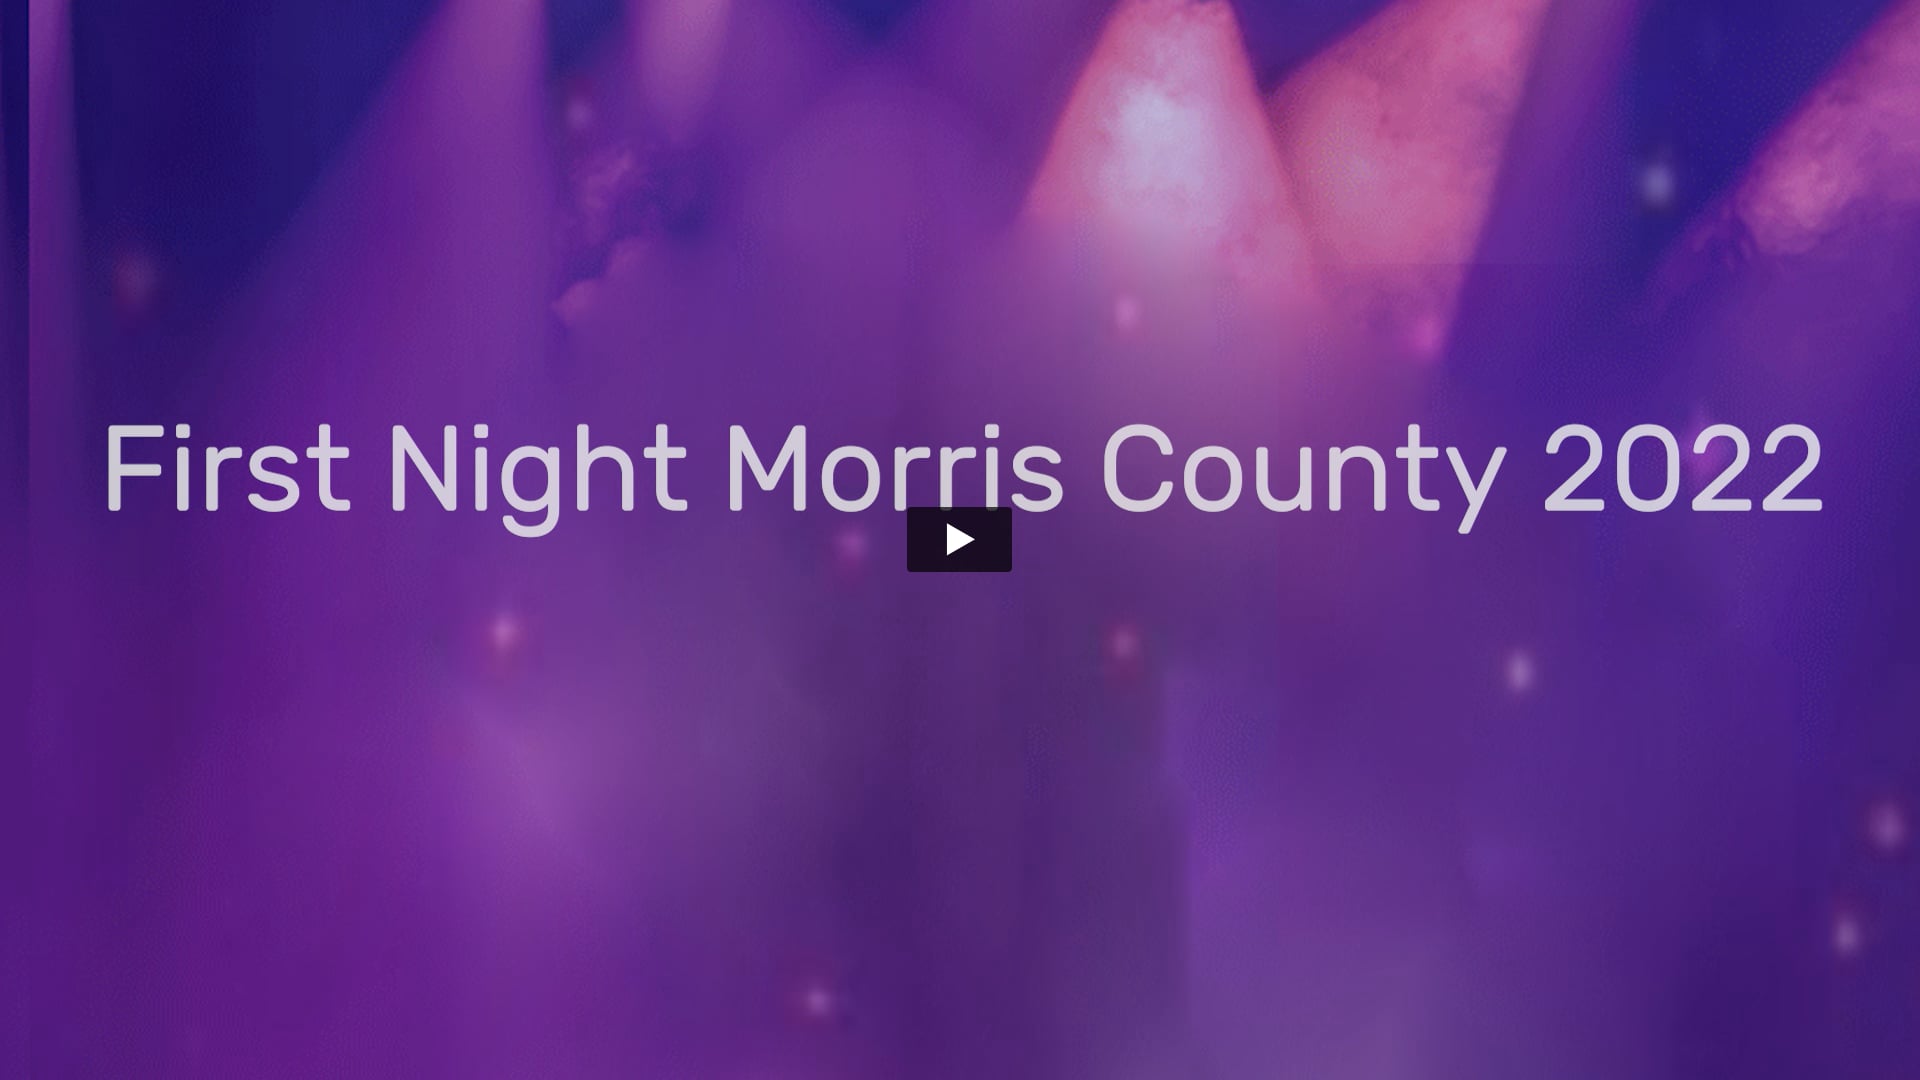 First Night Morris County 2022 December 31, 2021 Event Preview